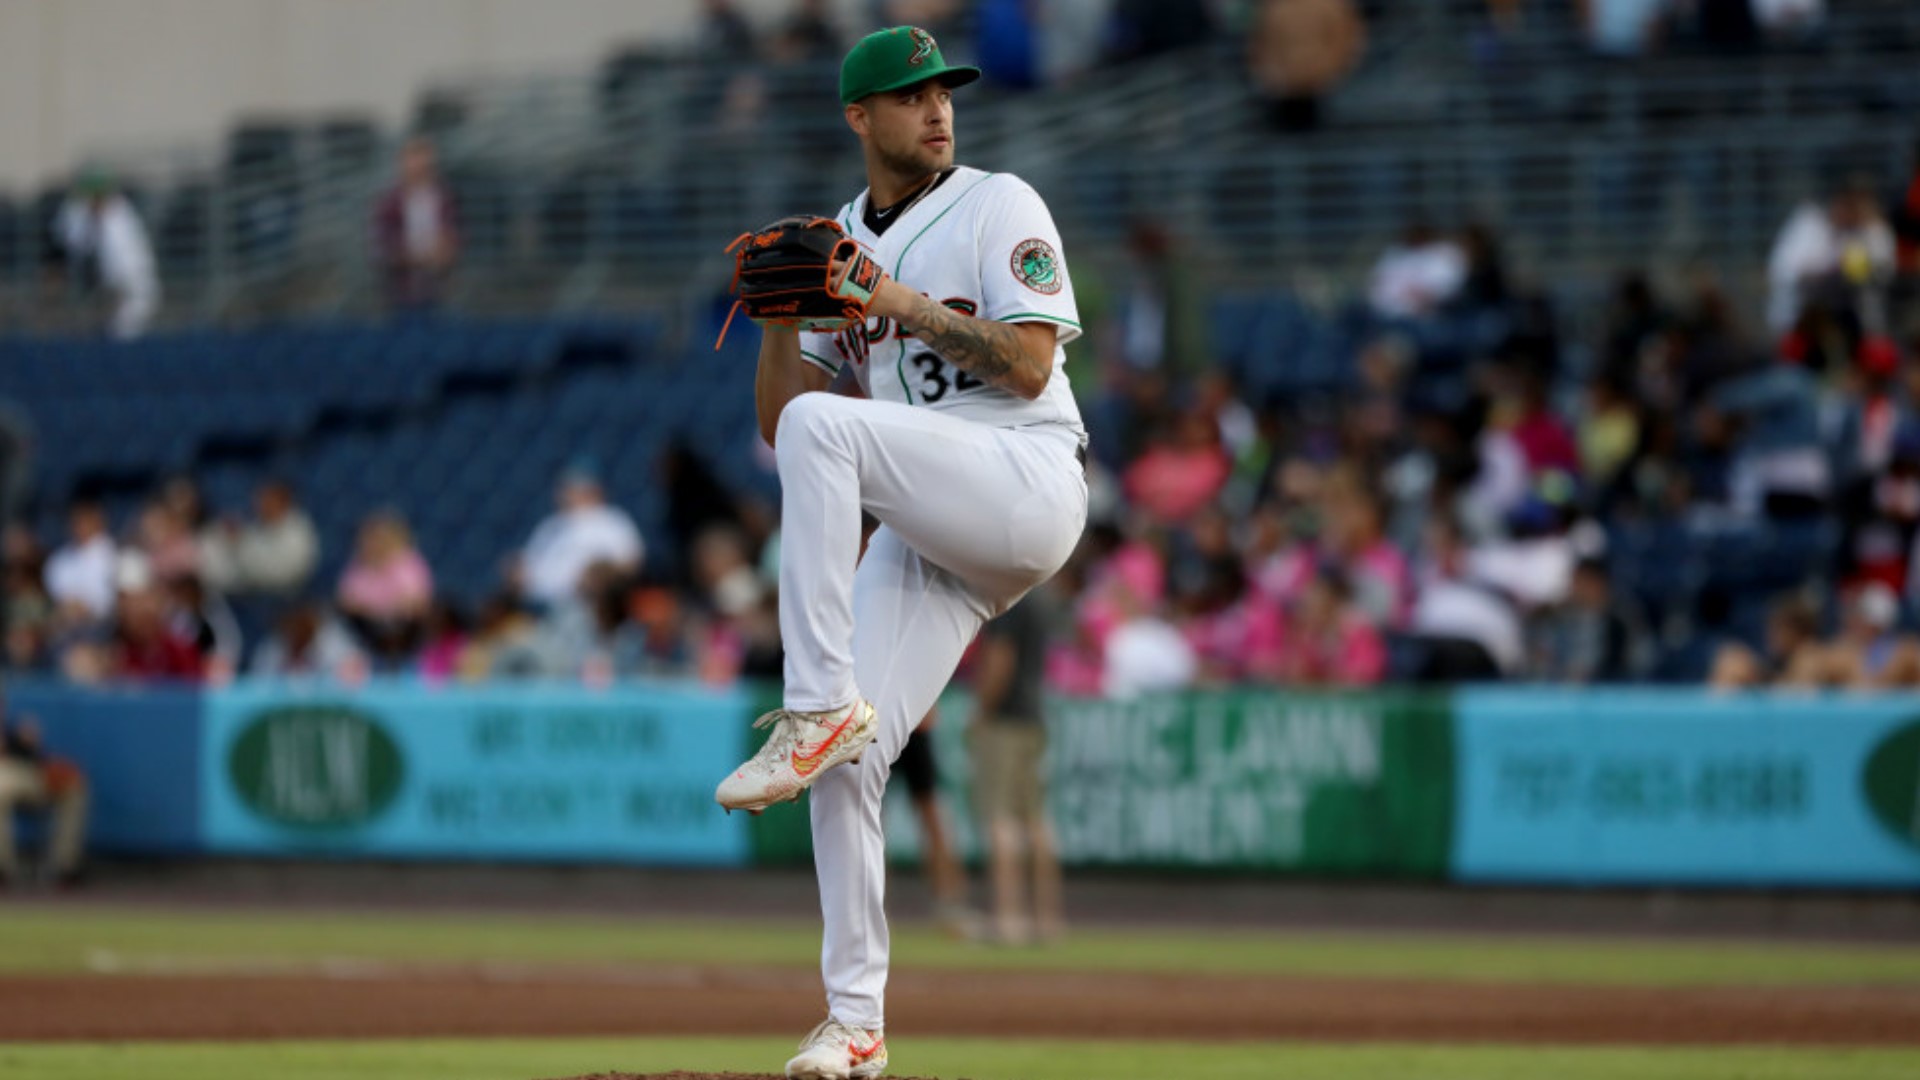 Tides starter Chris Vallimont pitched well, lasting 5.2 innings and didn’t allow a run.